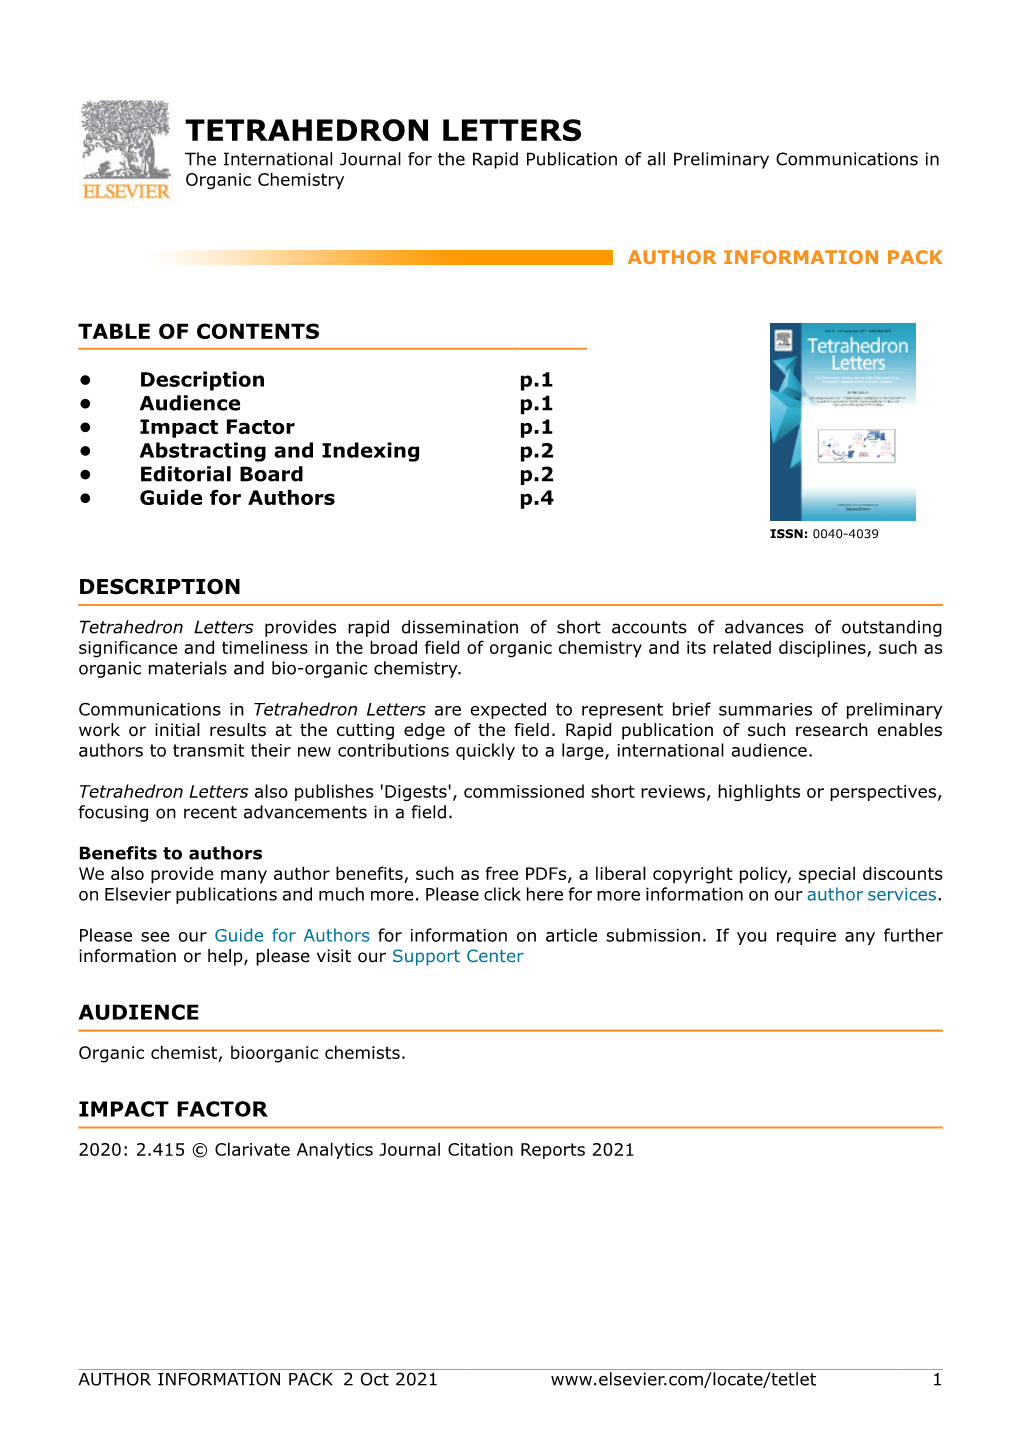 TETRAHEDRON LETTERS the International Journal for the Rapid Publication of All Preliminary Communications in Organic Chemistry